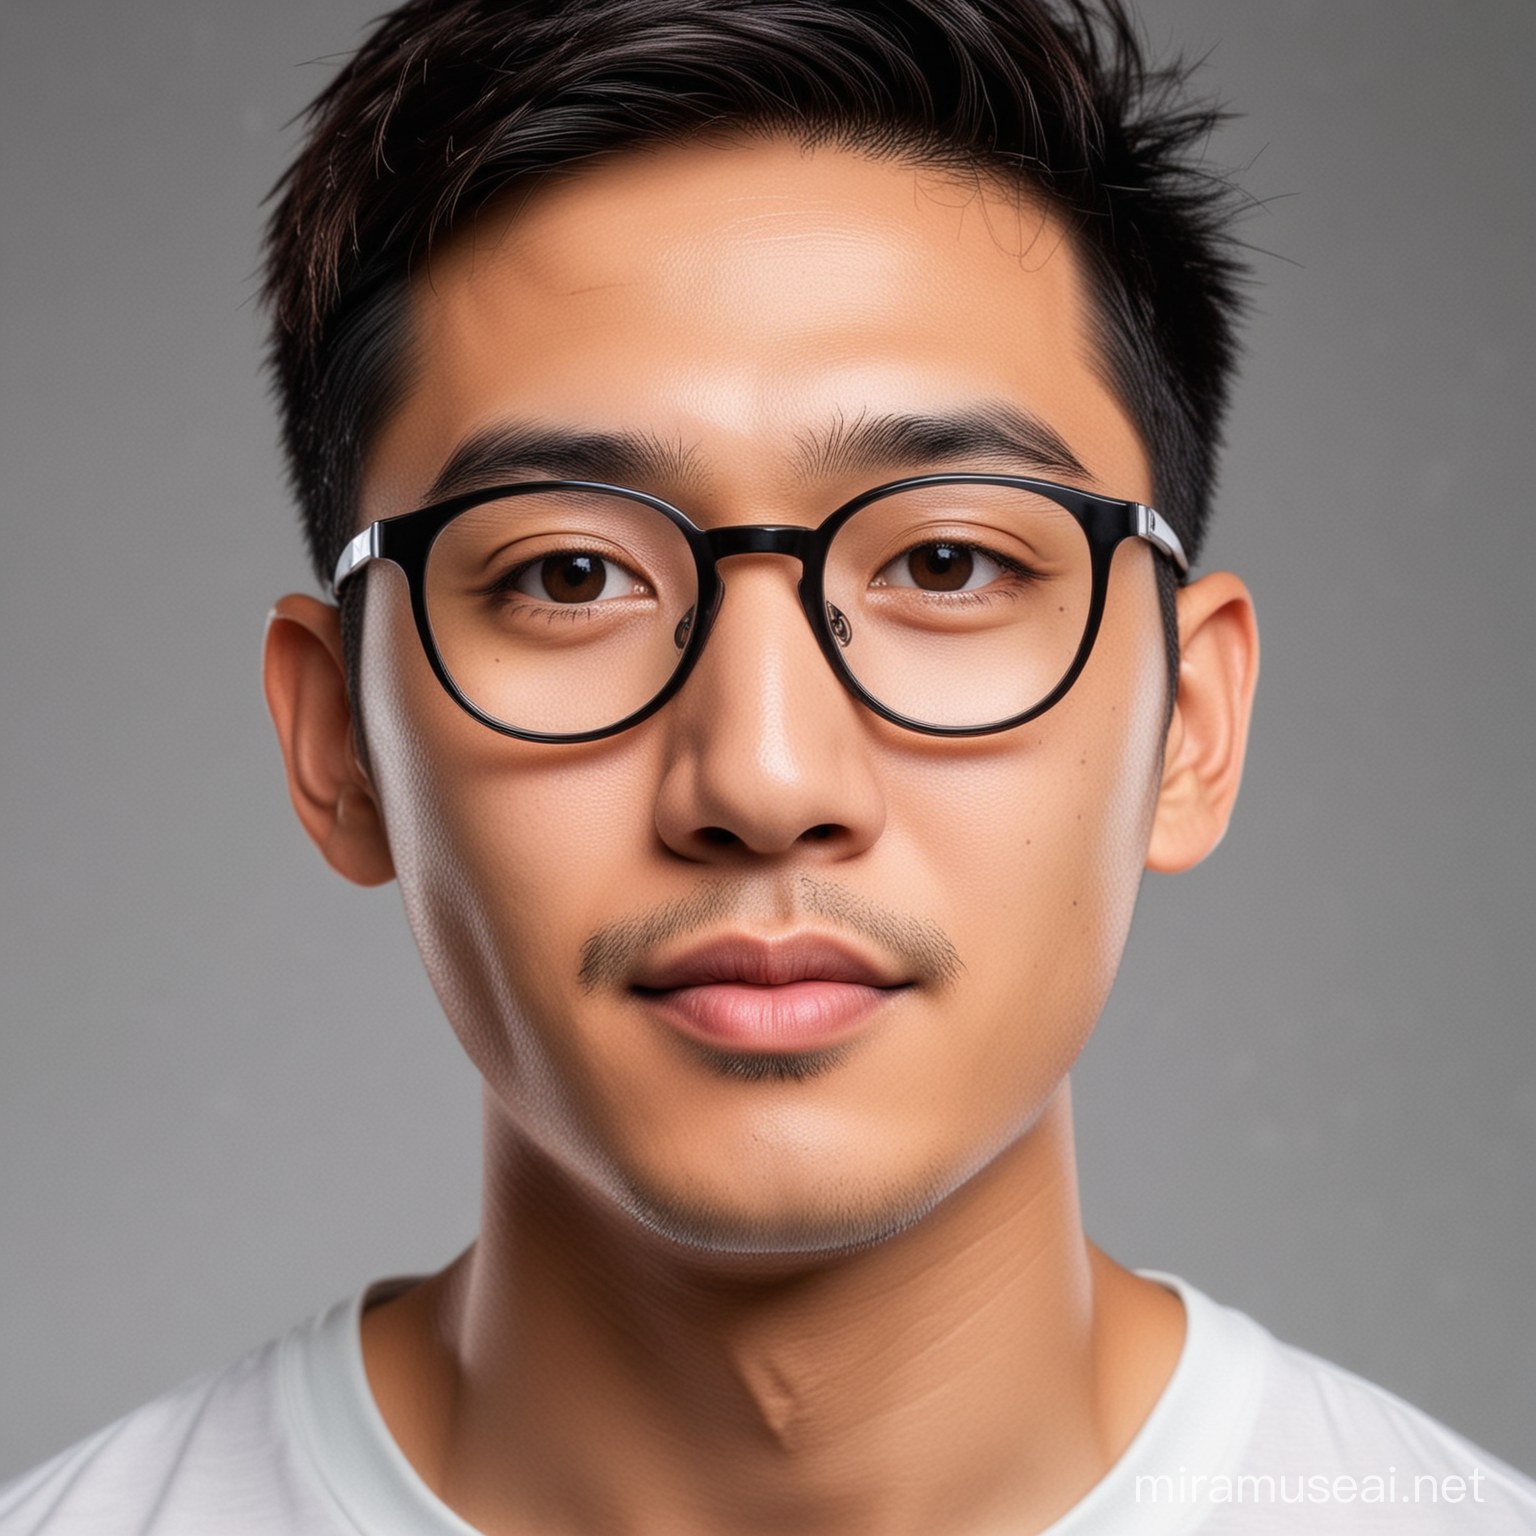 give me a profile photo to sue for Instagram. Asian male with glasses and make it a realistic photo with simple background. the instagram account is for tech tips